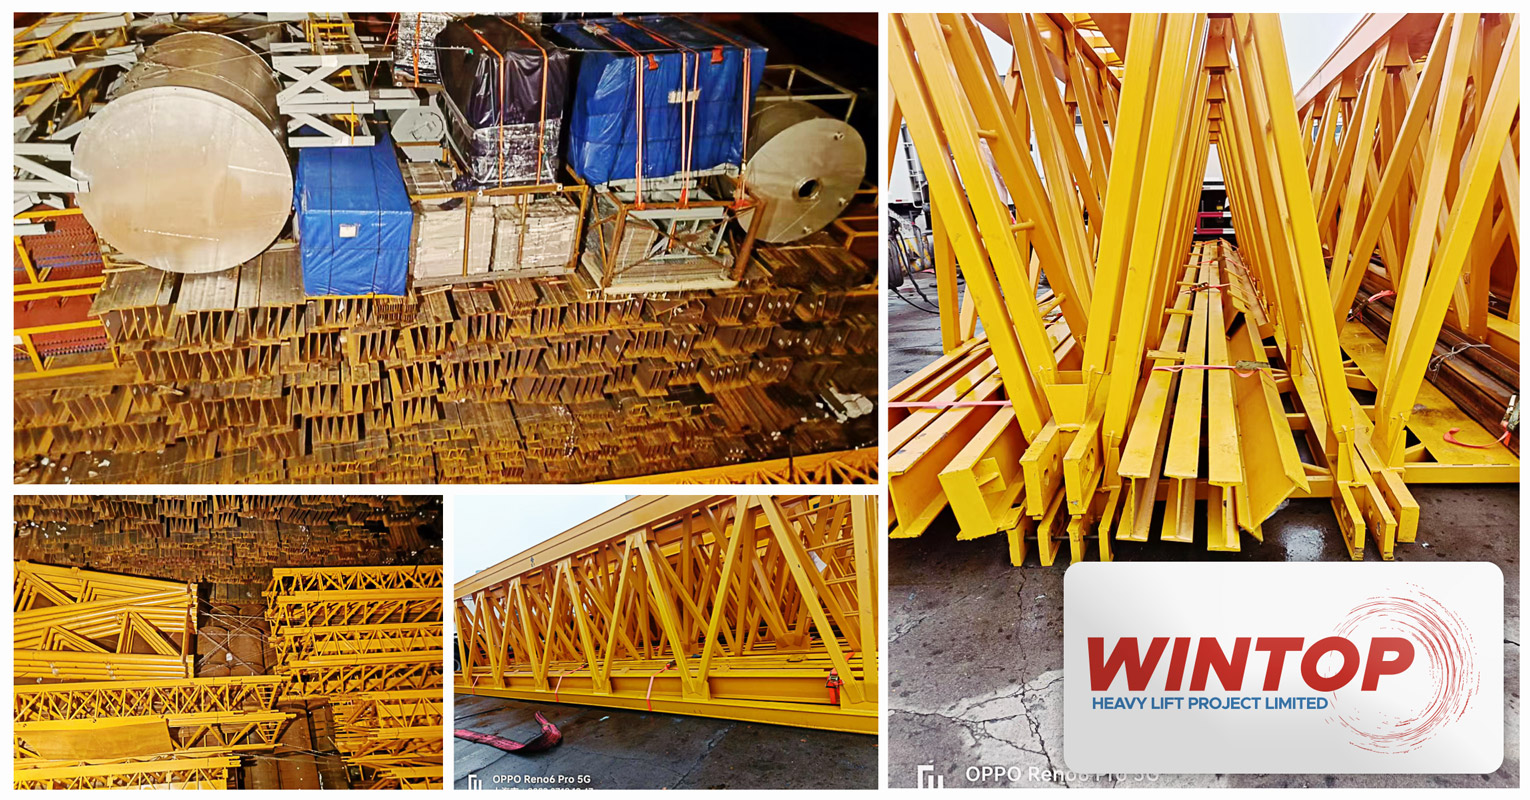 Wintop Heavy Lift Shipped a Gantry Crane Including it's Electric Winch from Shanghai to Klang, Malaysia